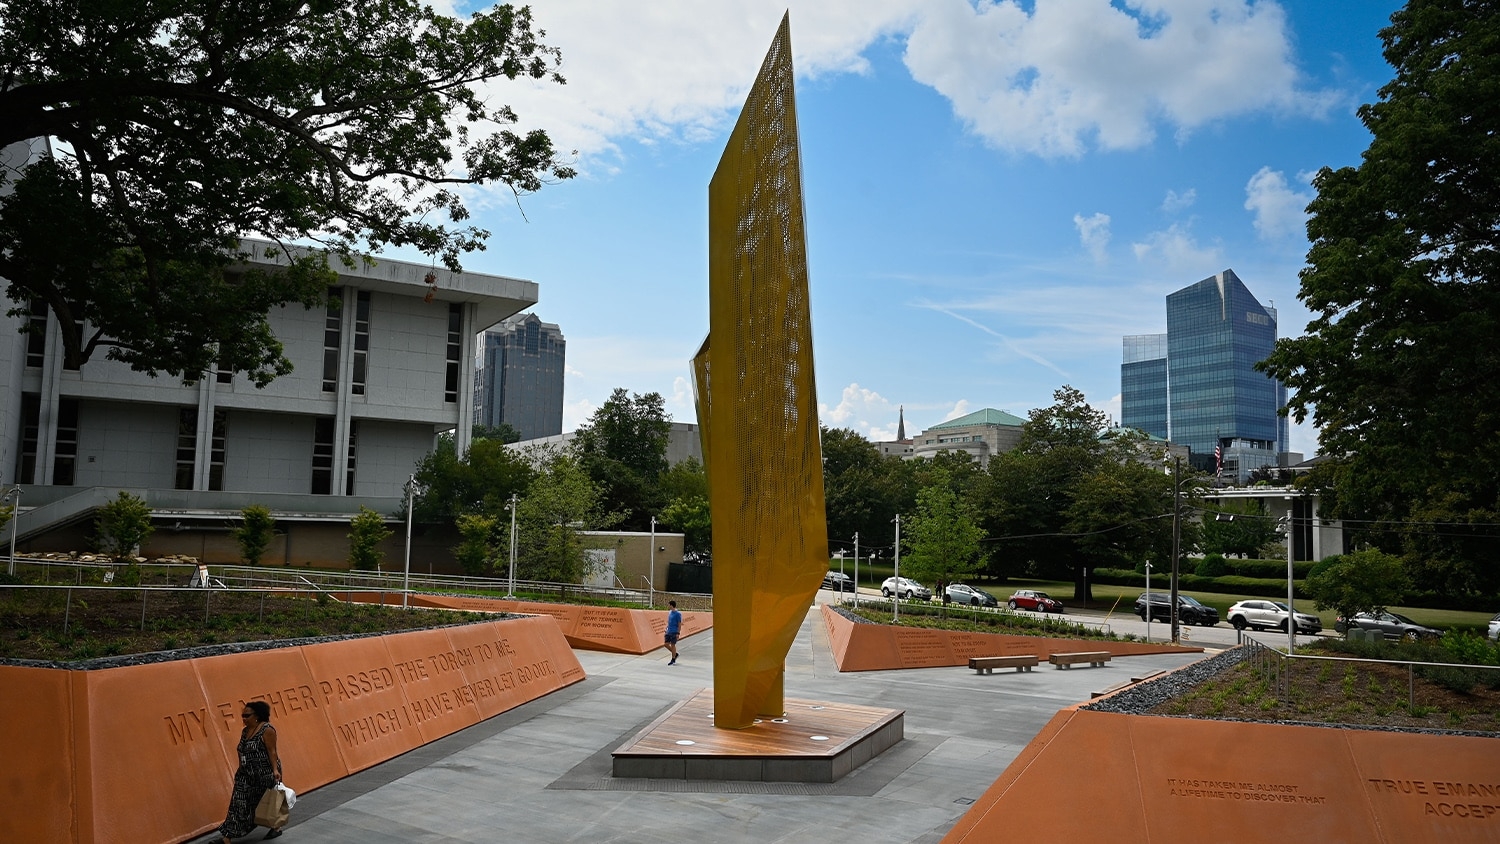 The central beacon in Freedom Park, with the Raleigh skyline in the background